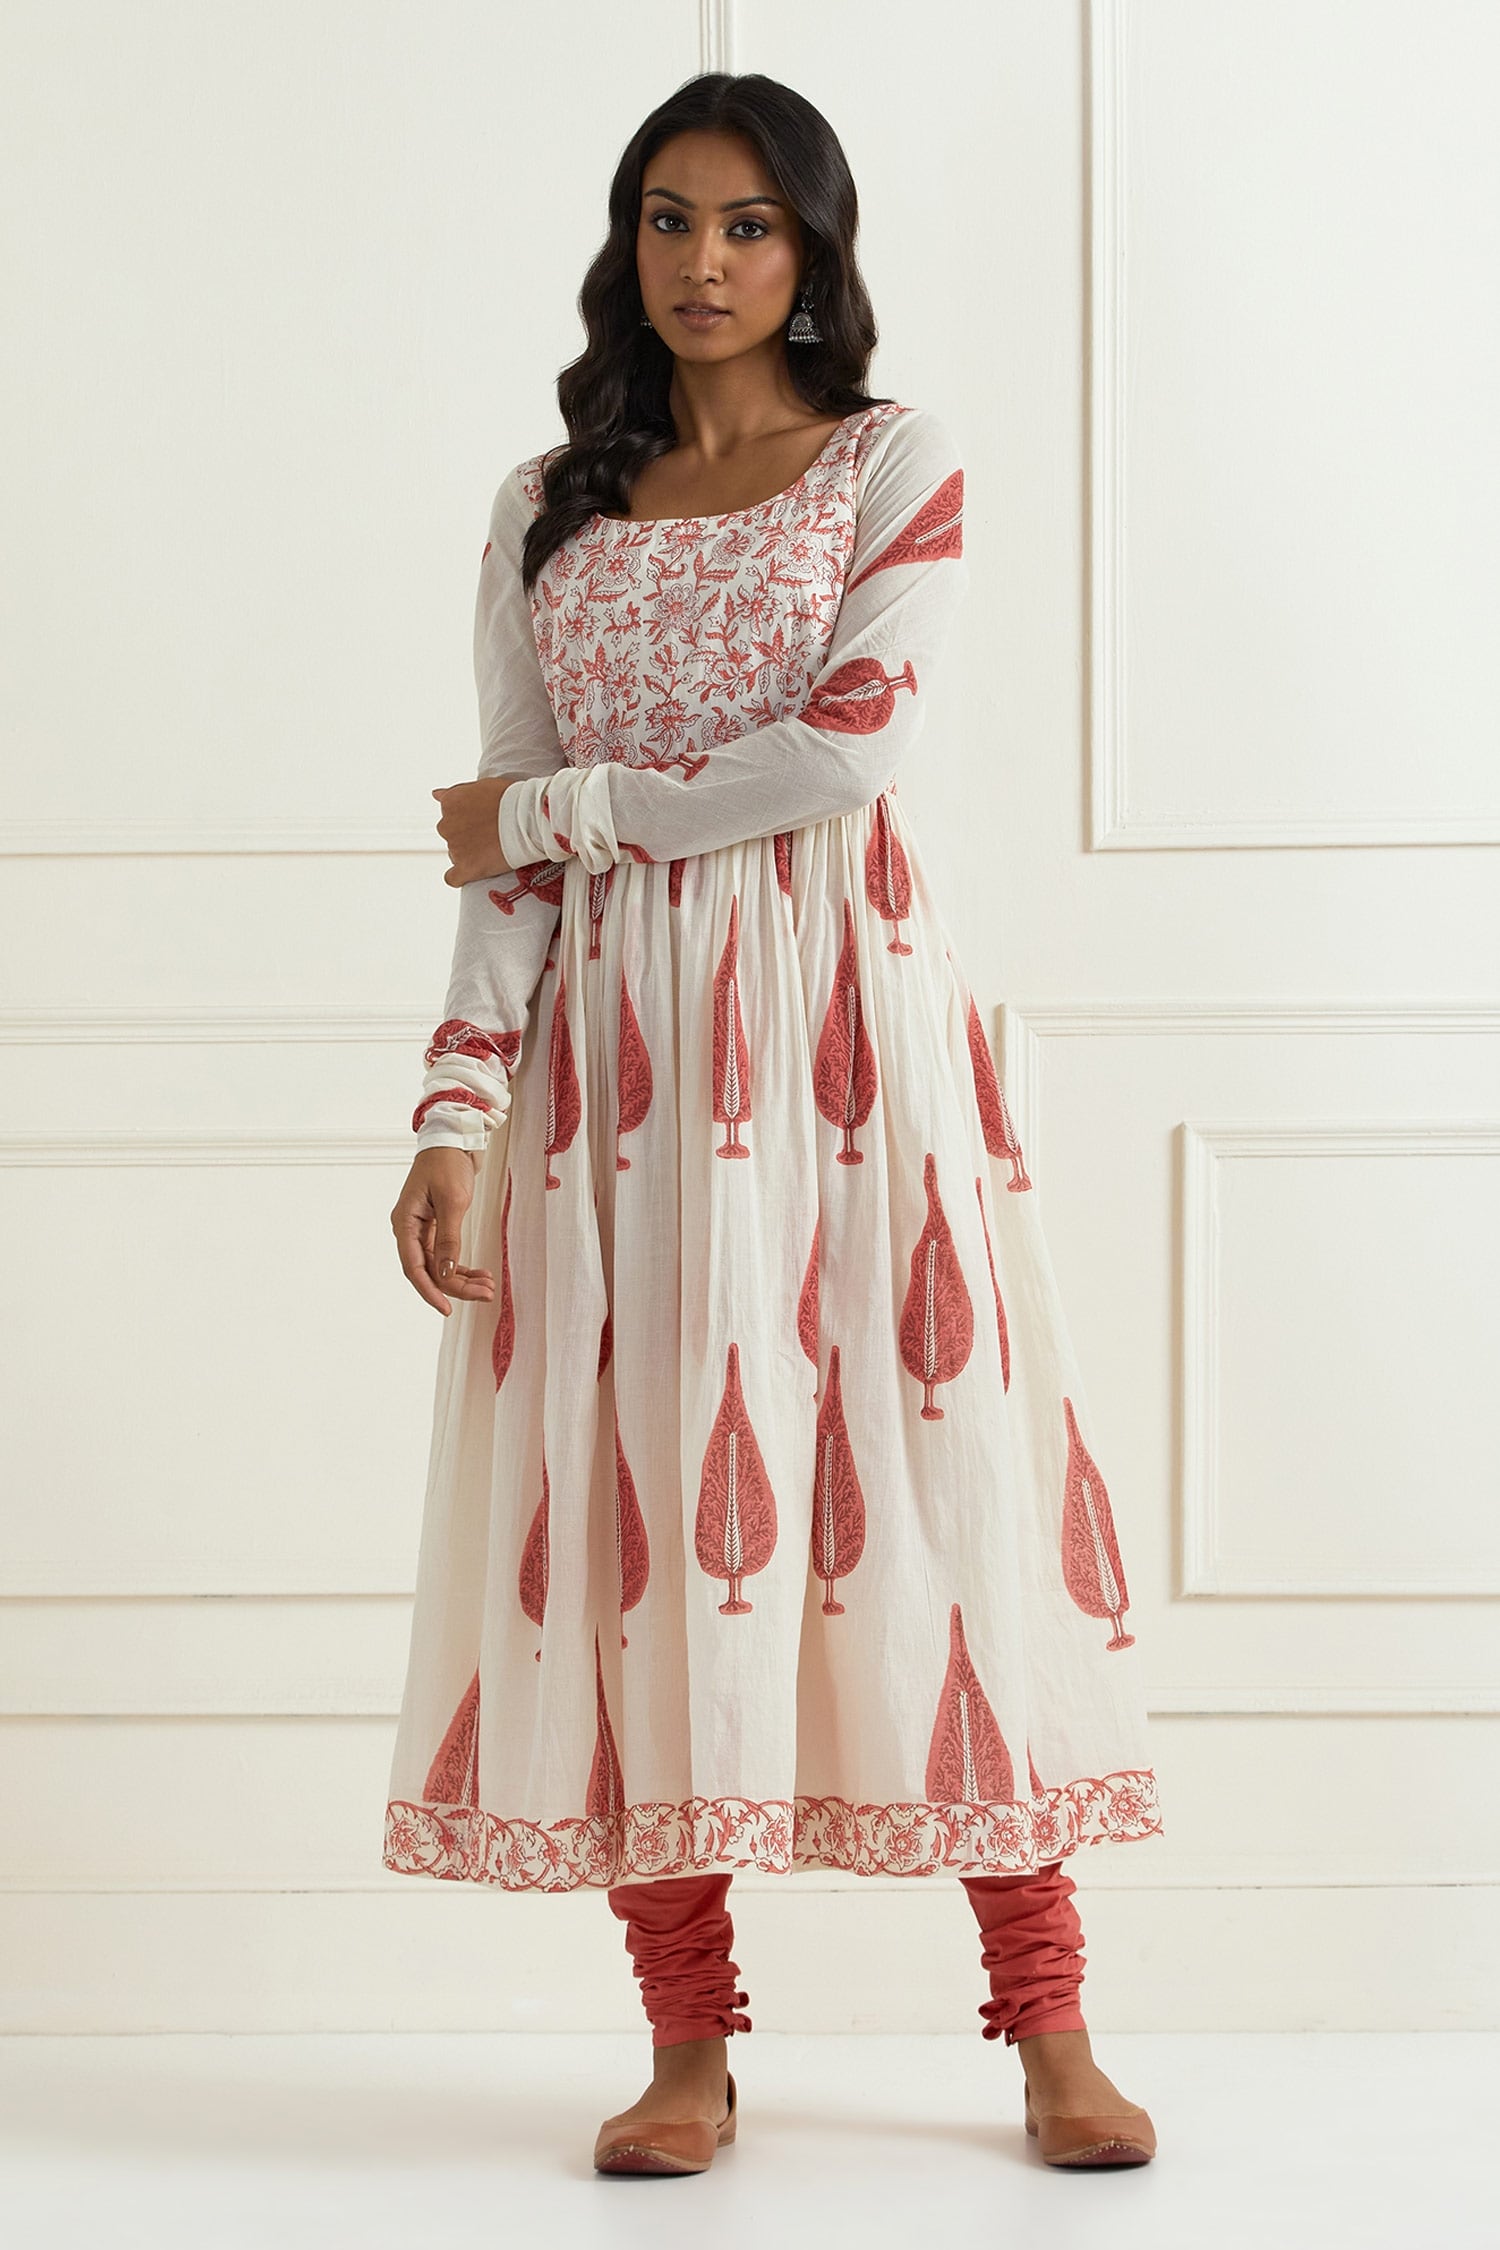 Buy Red Cotton Churidar For Women by Ikshita Choudhary Online at